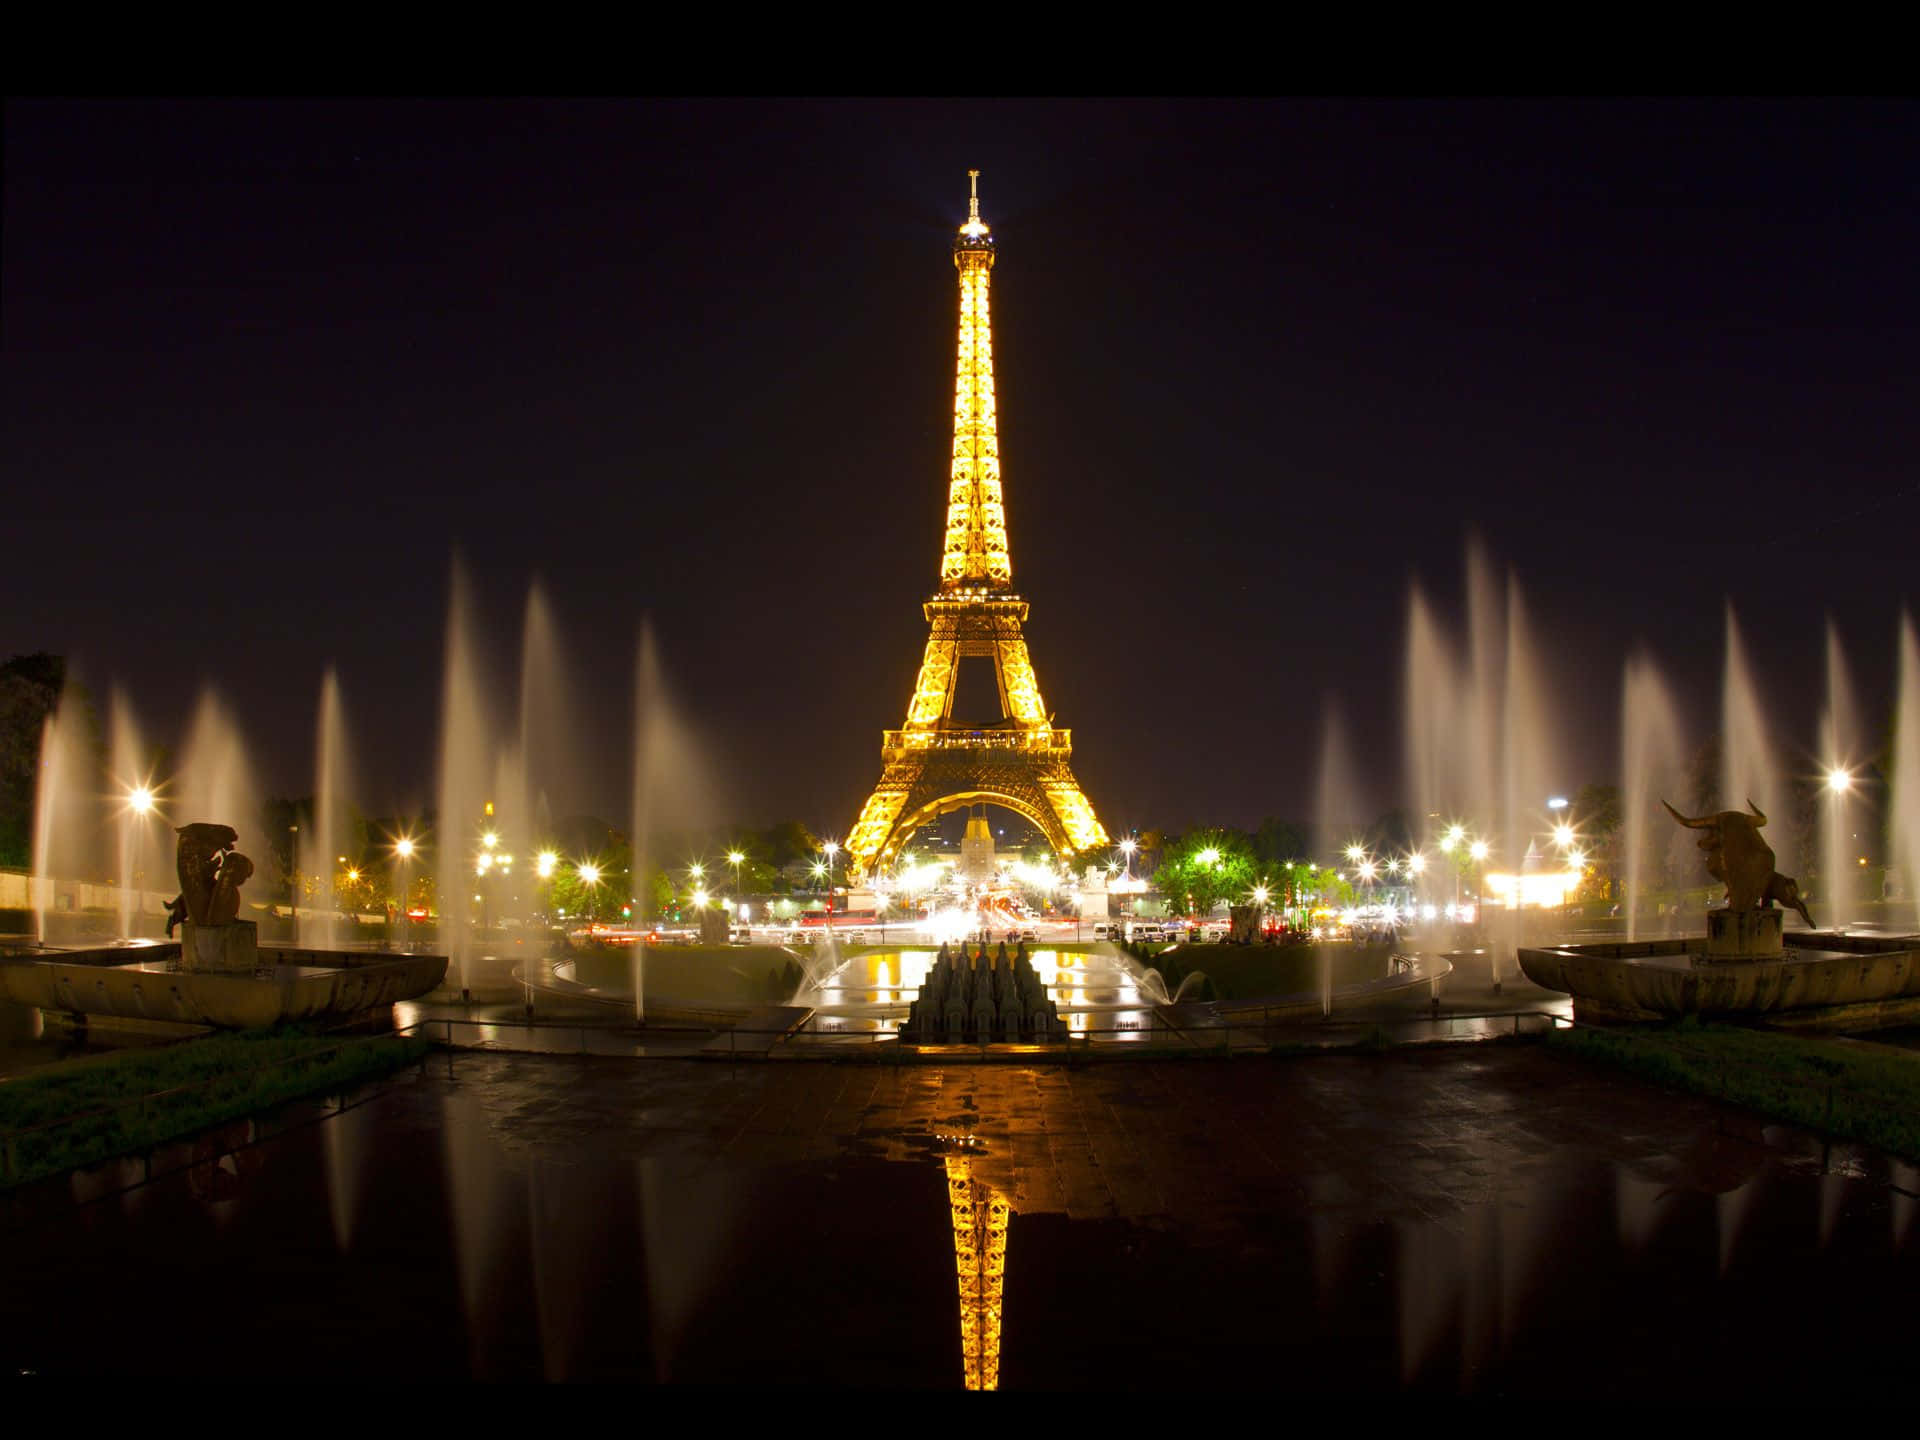 The iconic and impressive Eiffel Tower lit up at night in Paris.